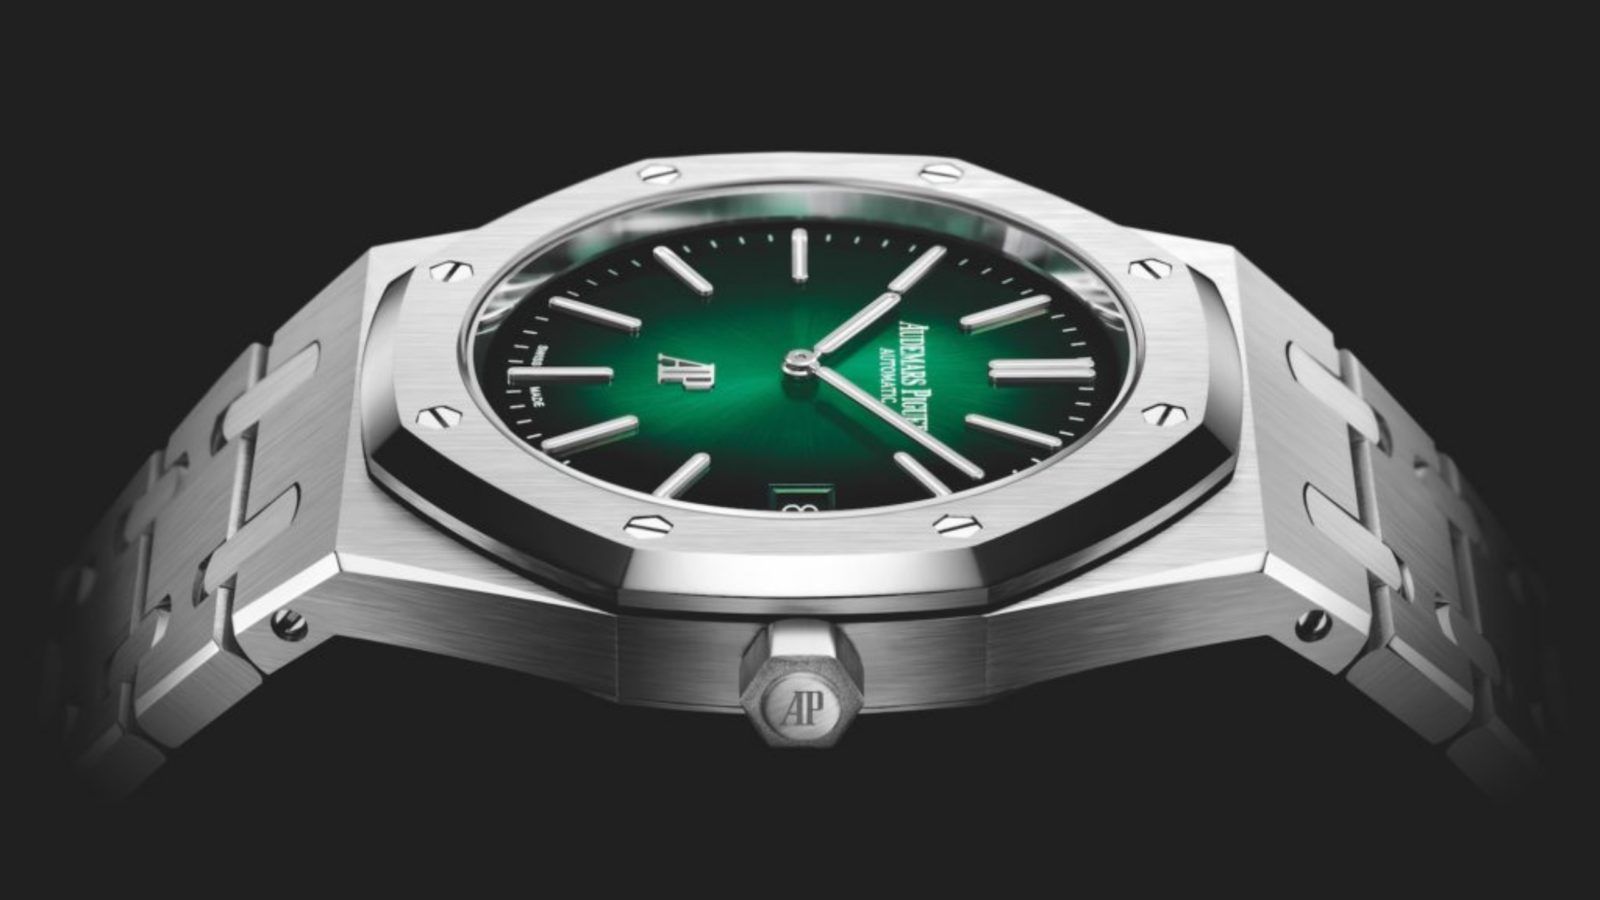 The best Audemars Piguet Royal Oak watches to look forward to in 2021